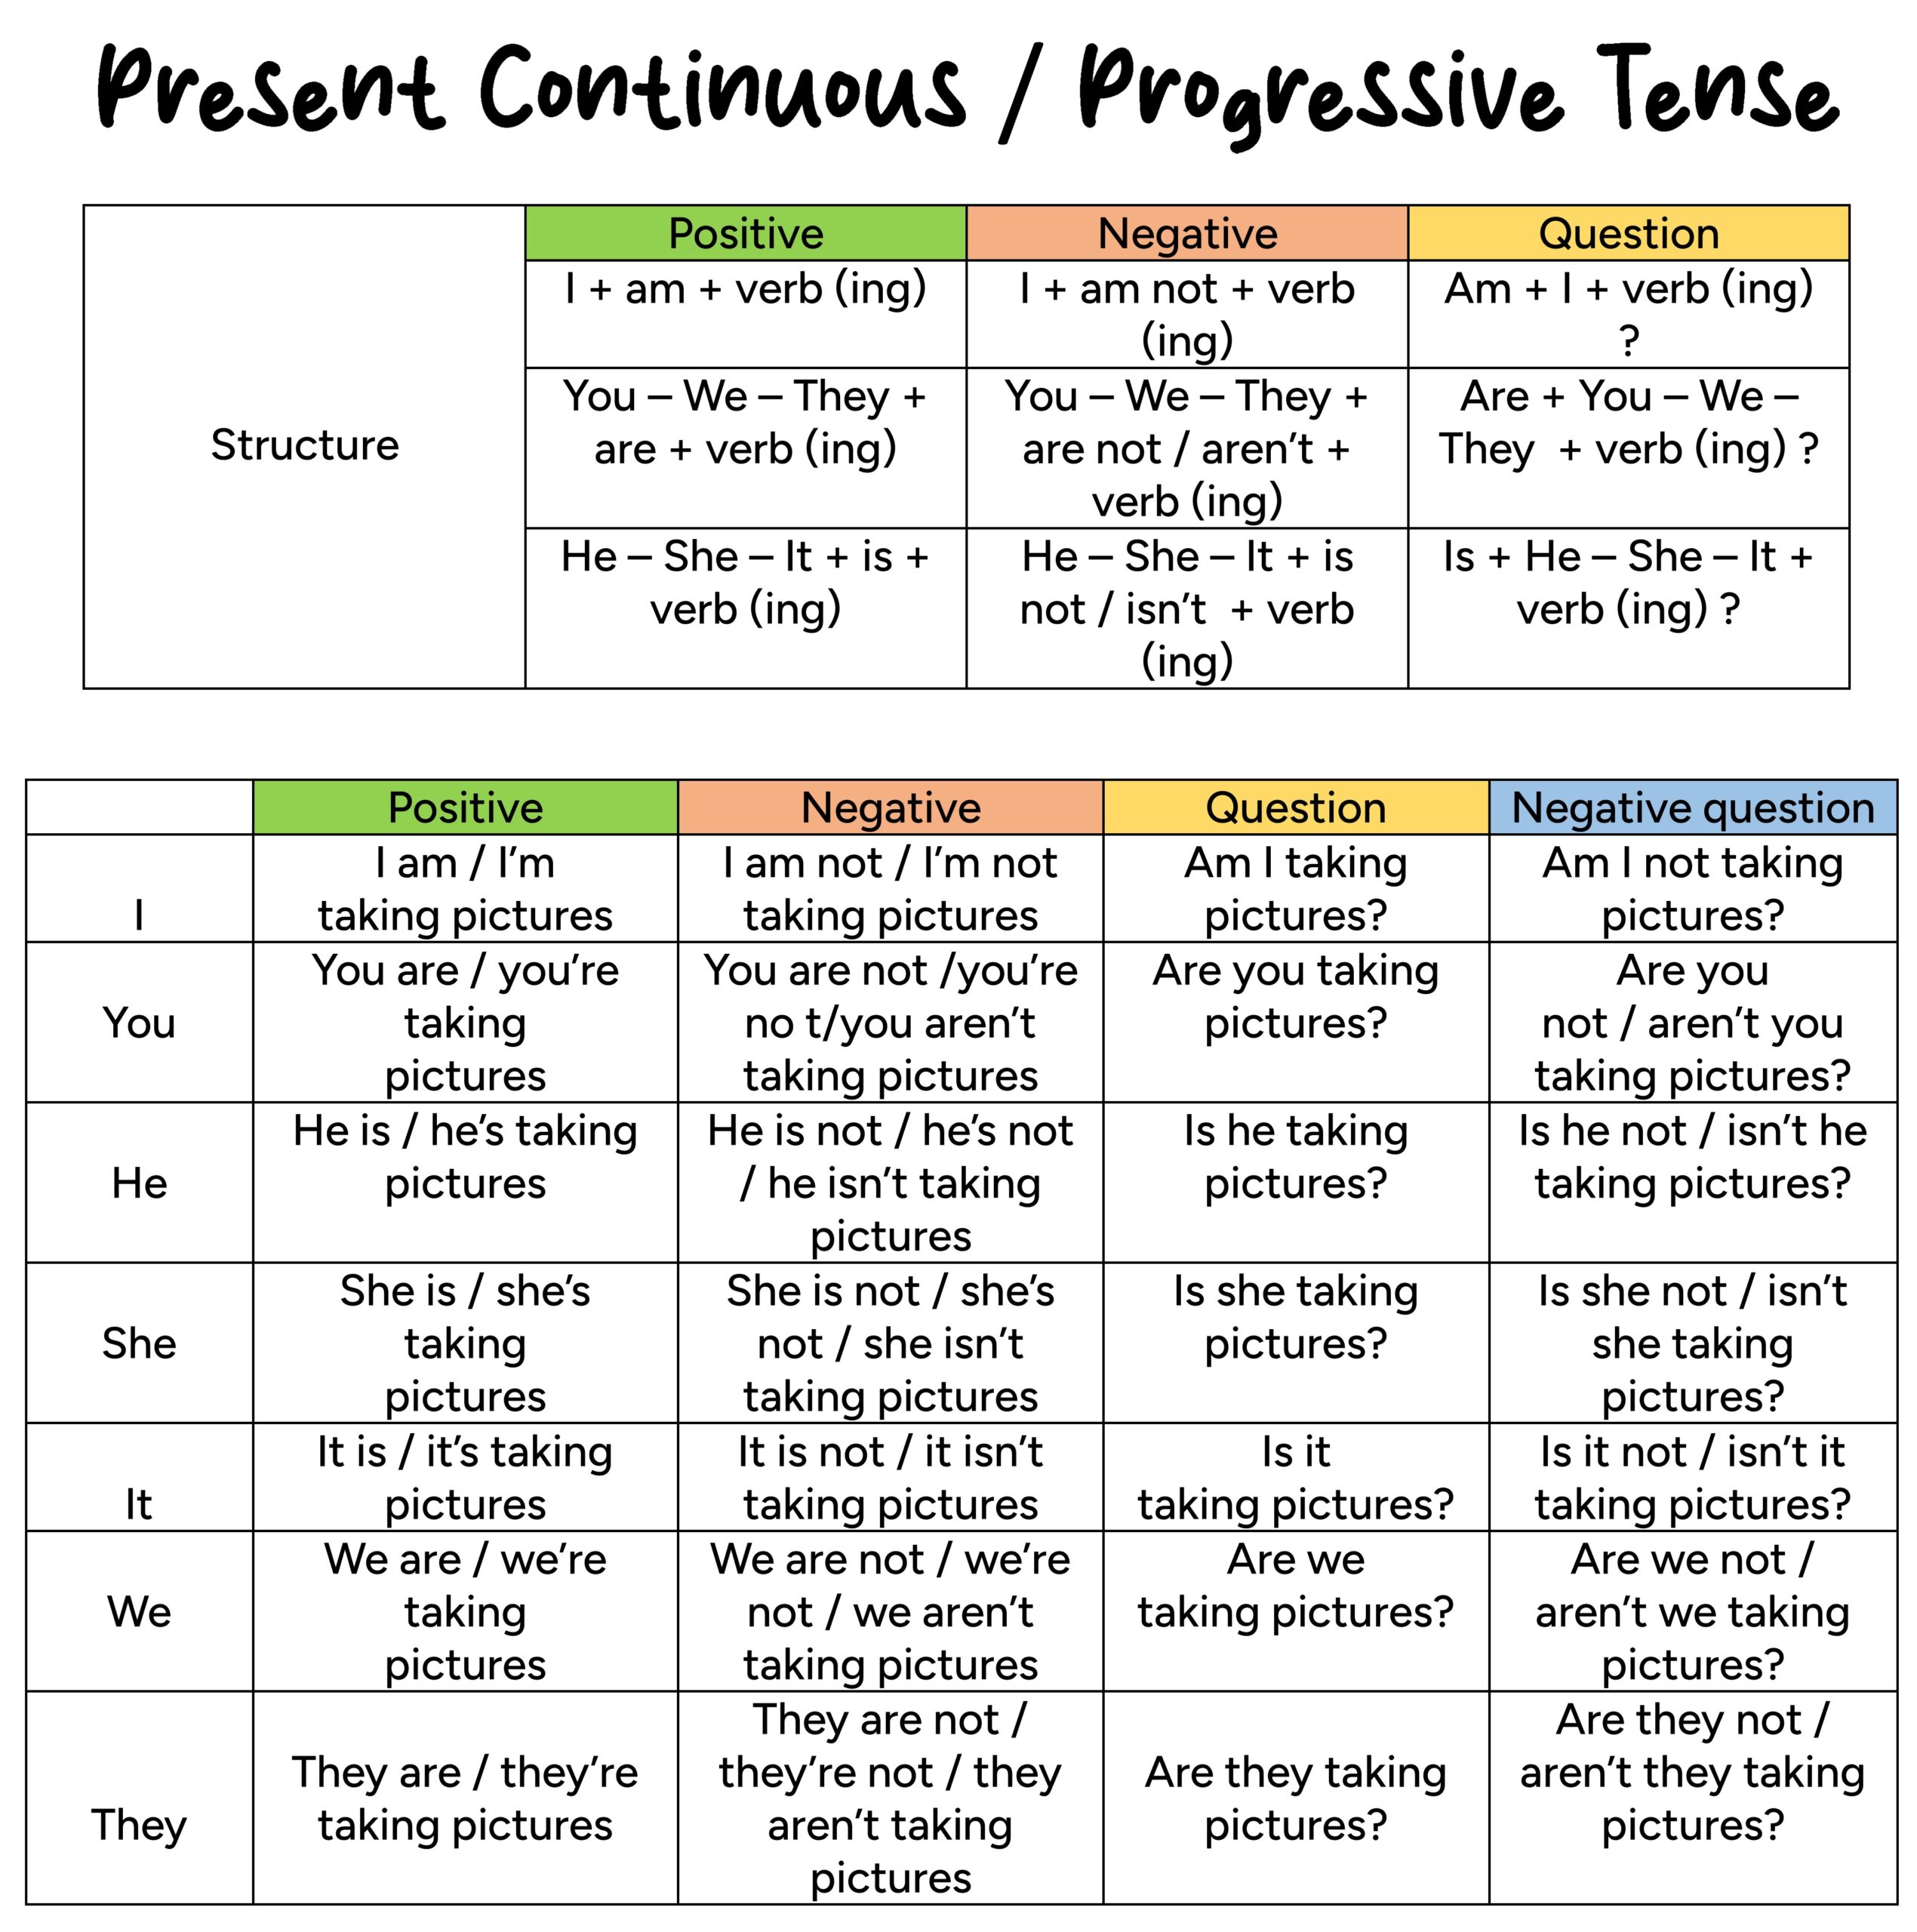 What are you doing now? Present continuous tense 